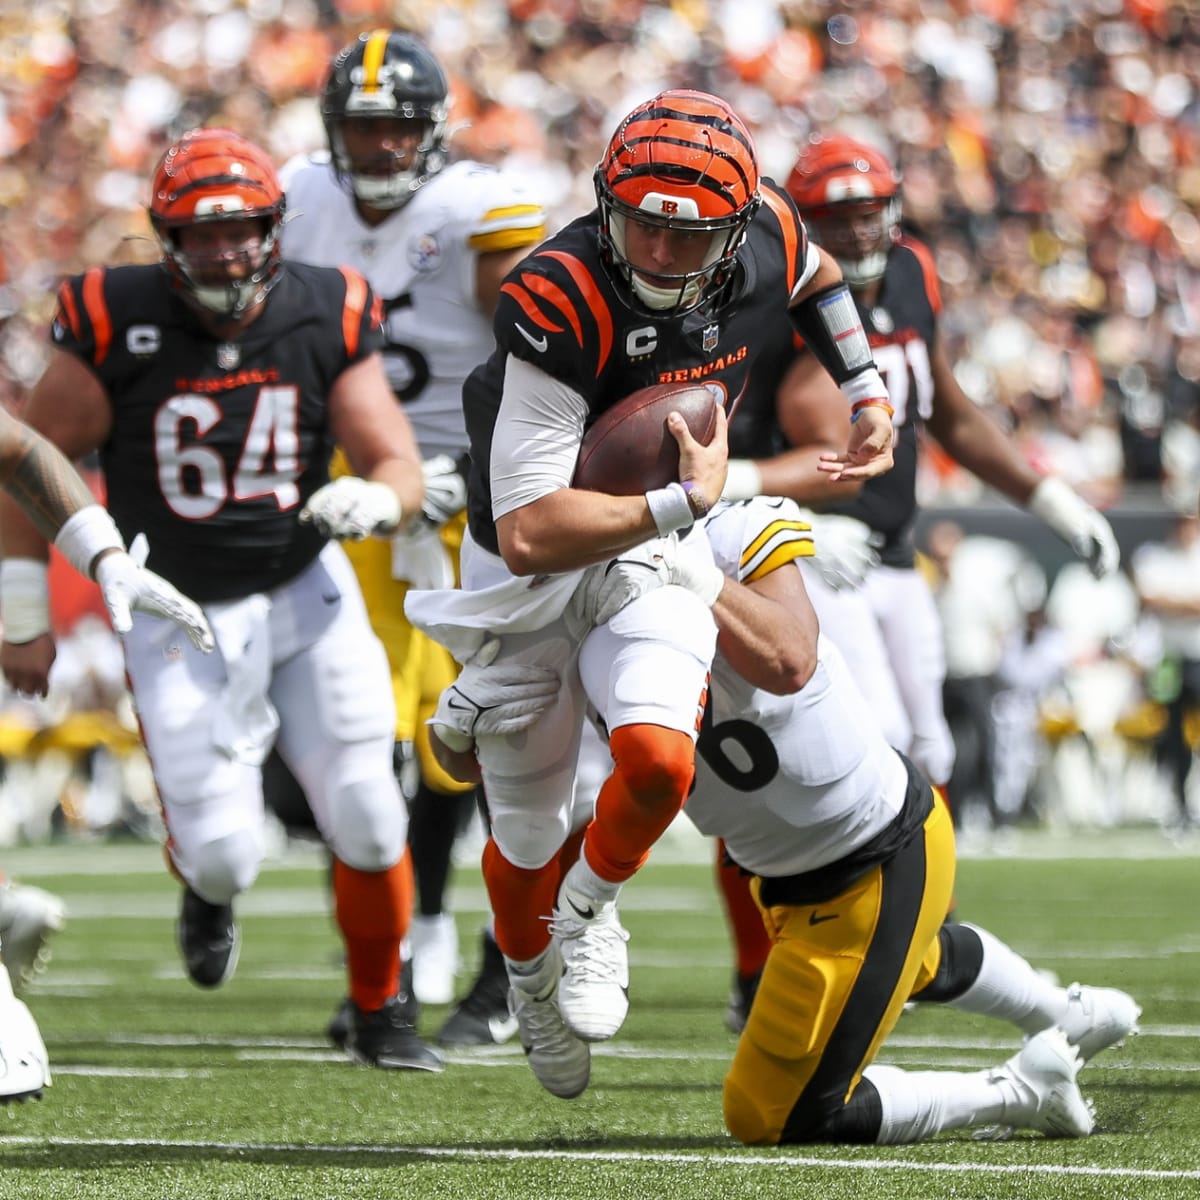 Bengals' Joe Burrow says he's 'ready to go' for Week 1 against